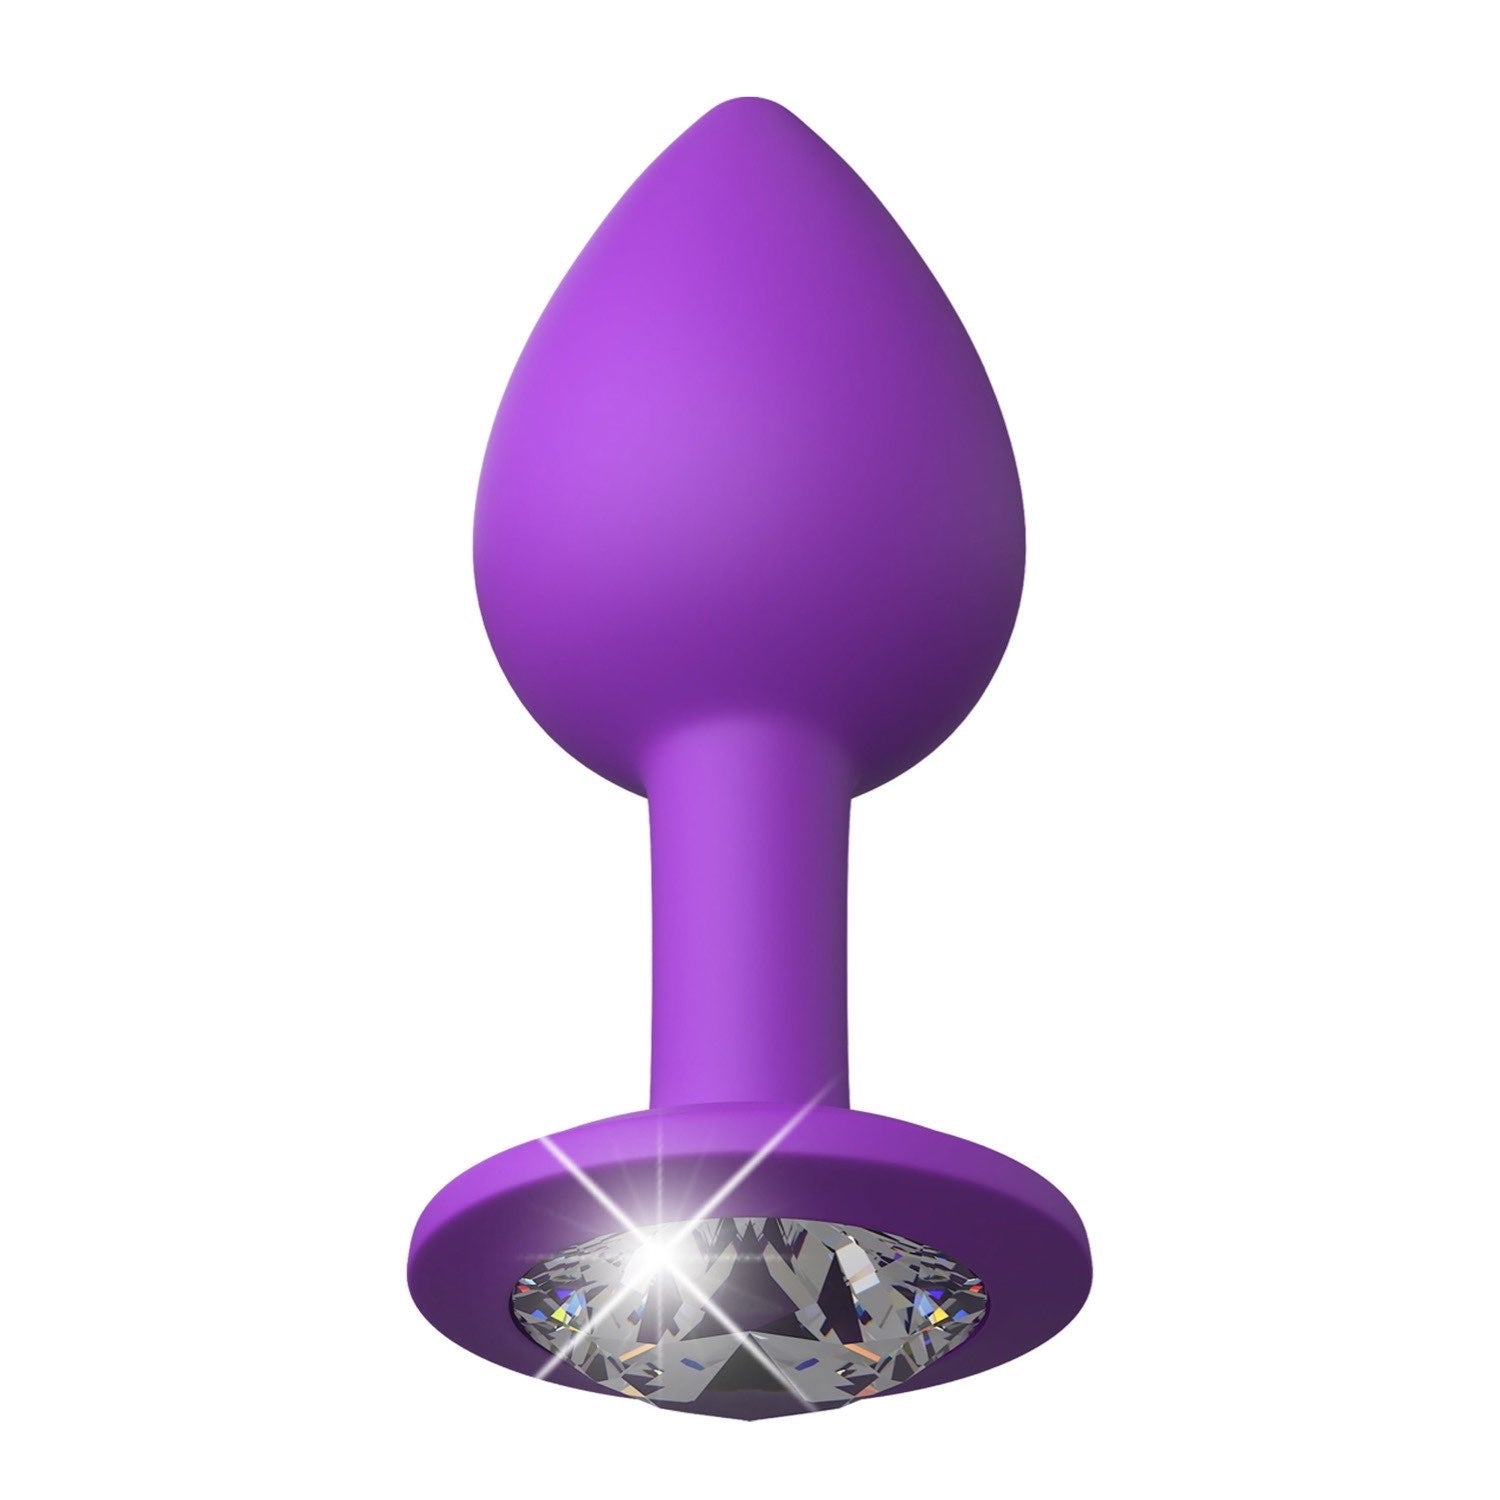 Fantasy For Her Little Gem Small Plug - Purple 7.2 cm Butt Plug with Jewel Base by Pipedream